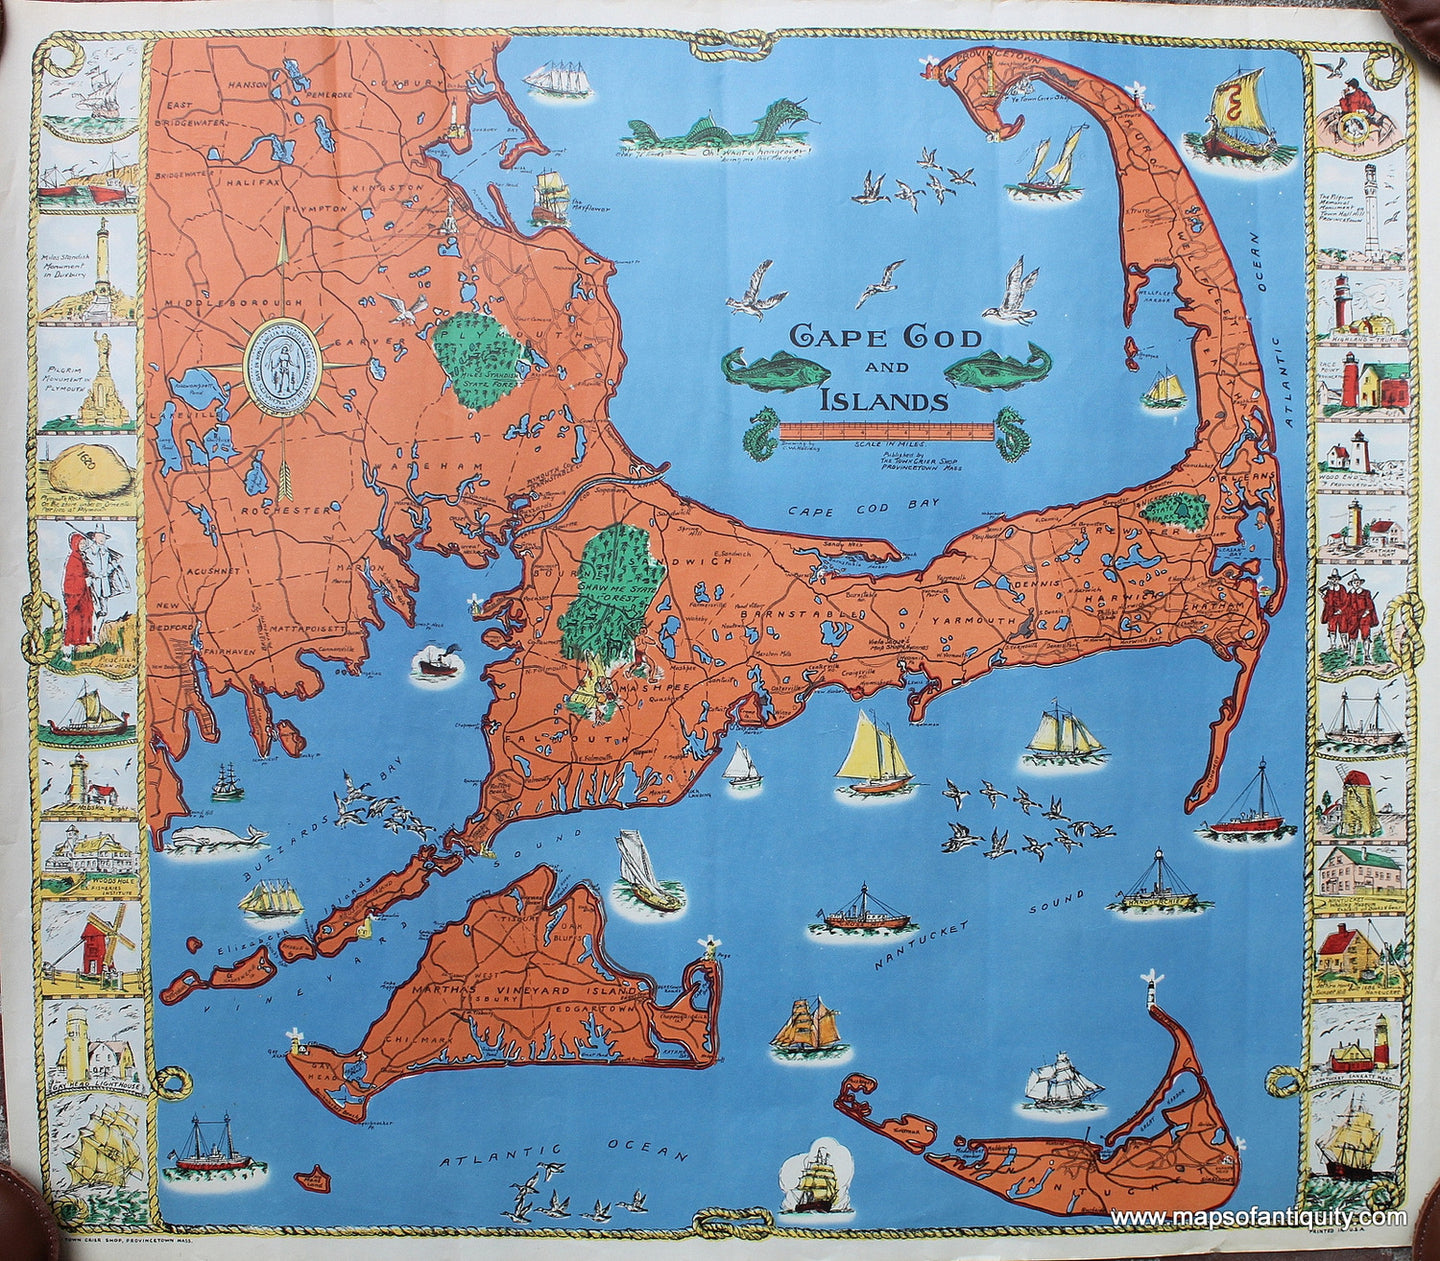 Antique-Map-Cape-Cod-and-Islands**********-Cape-Cod--1940-Town-Crier-Maps-Of-Antiquity